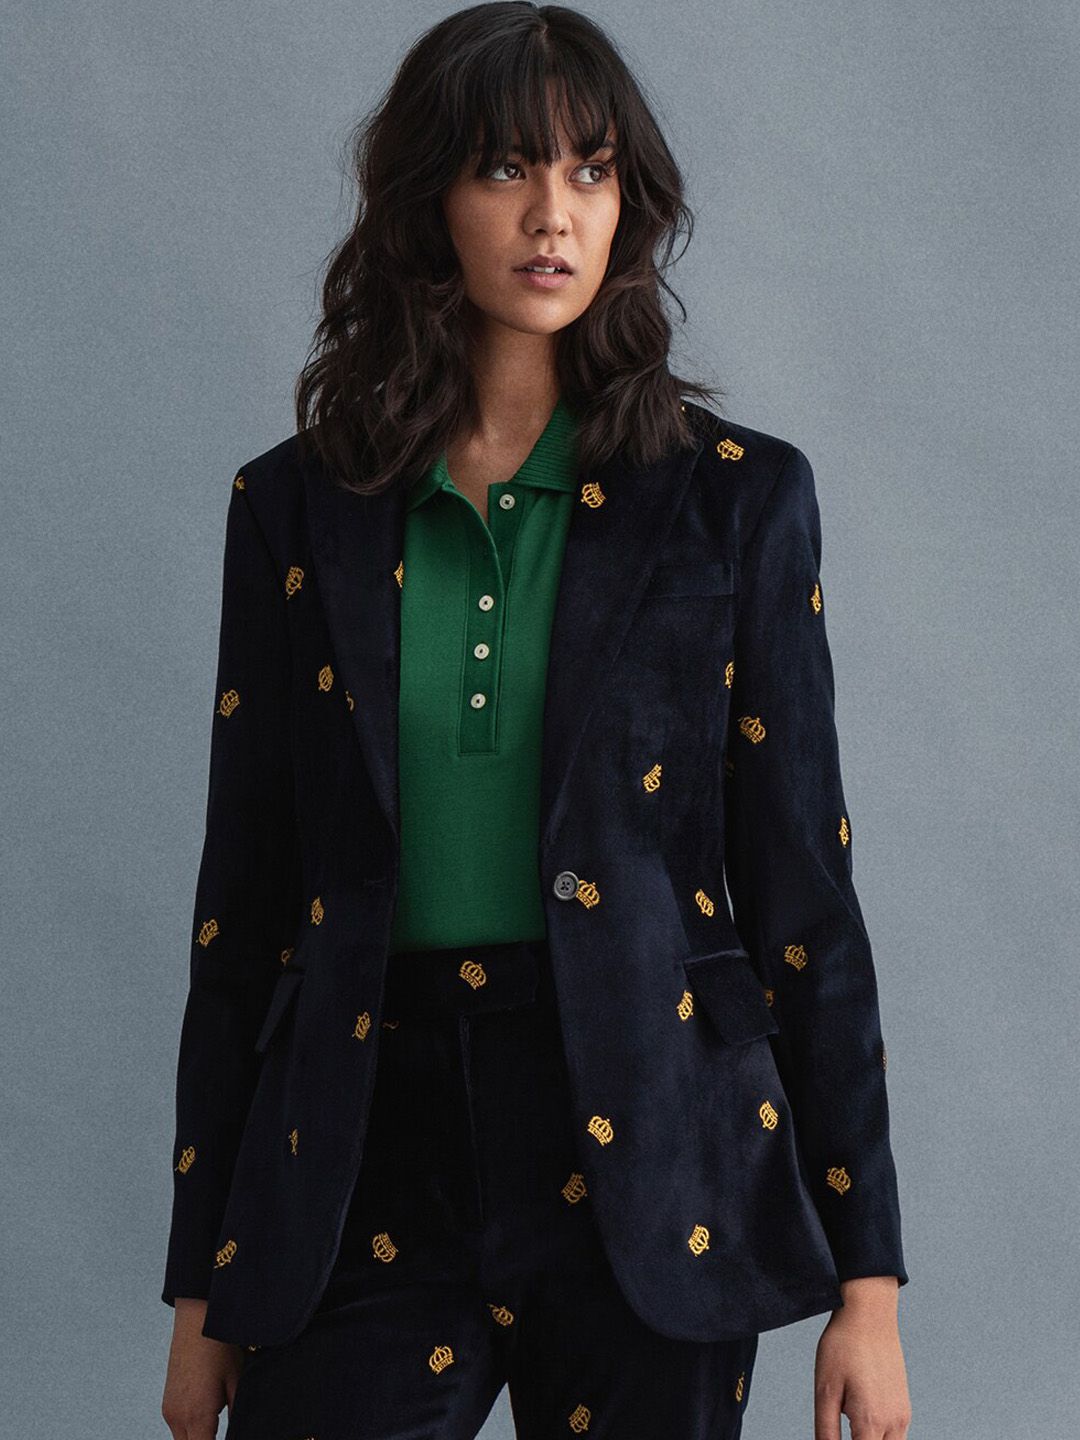 GANT Women Navy Blue & Gold-Coloured Printed Single-Breasted Blazer Price in India